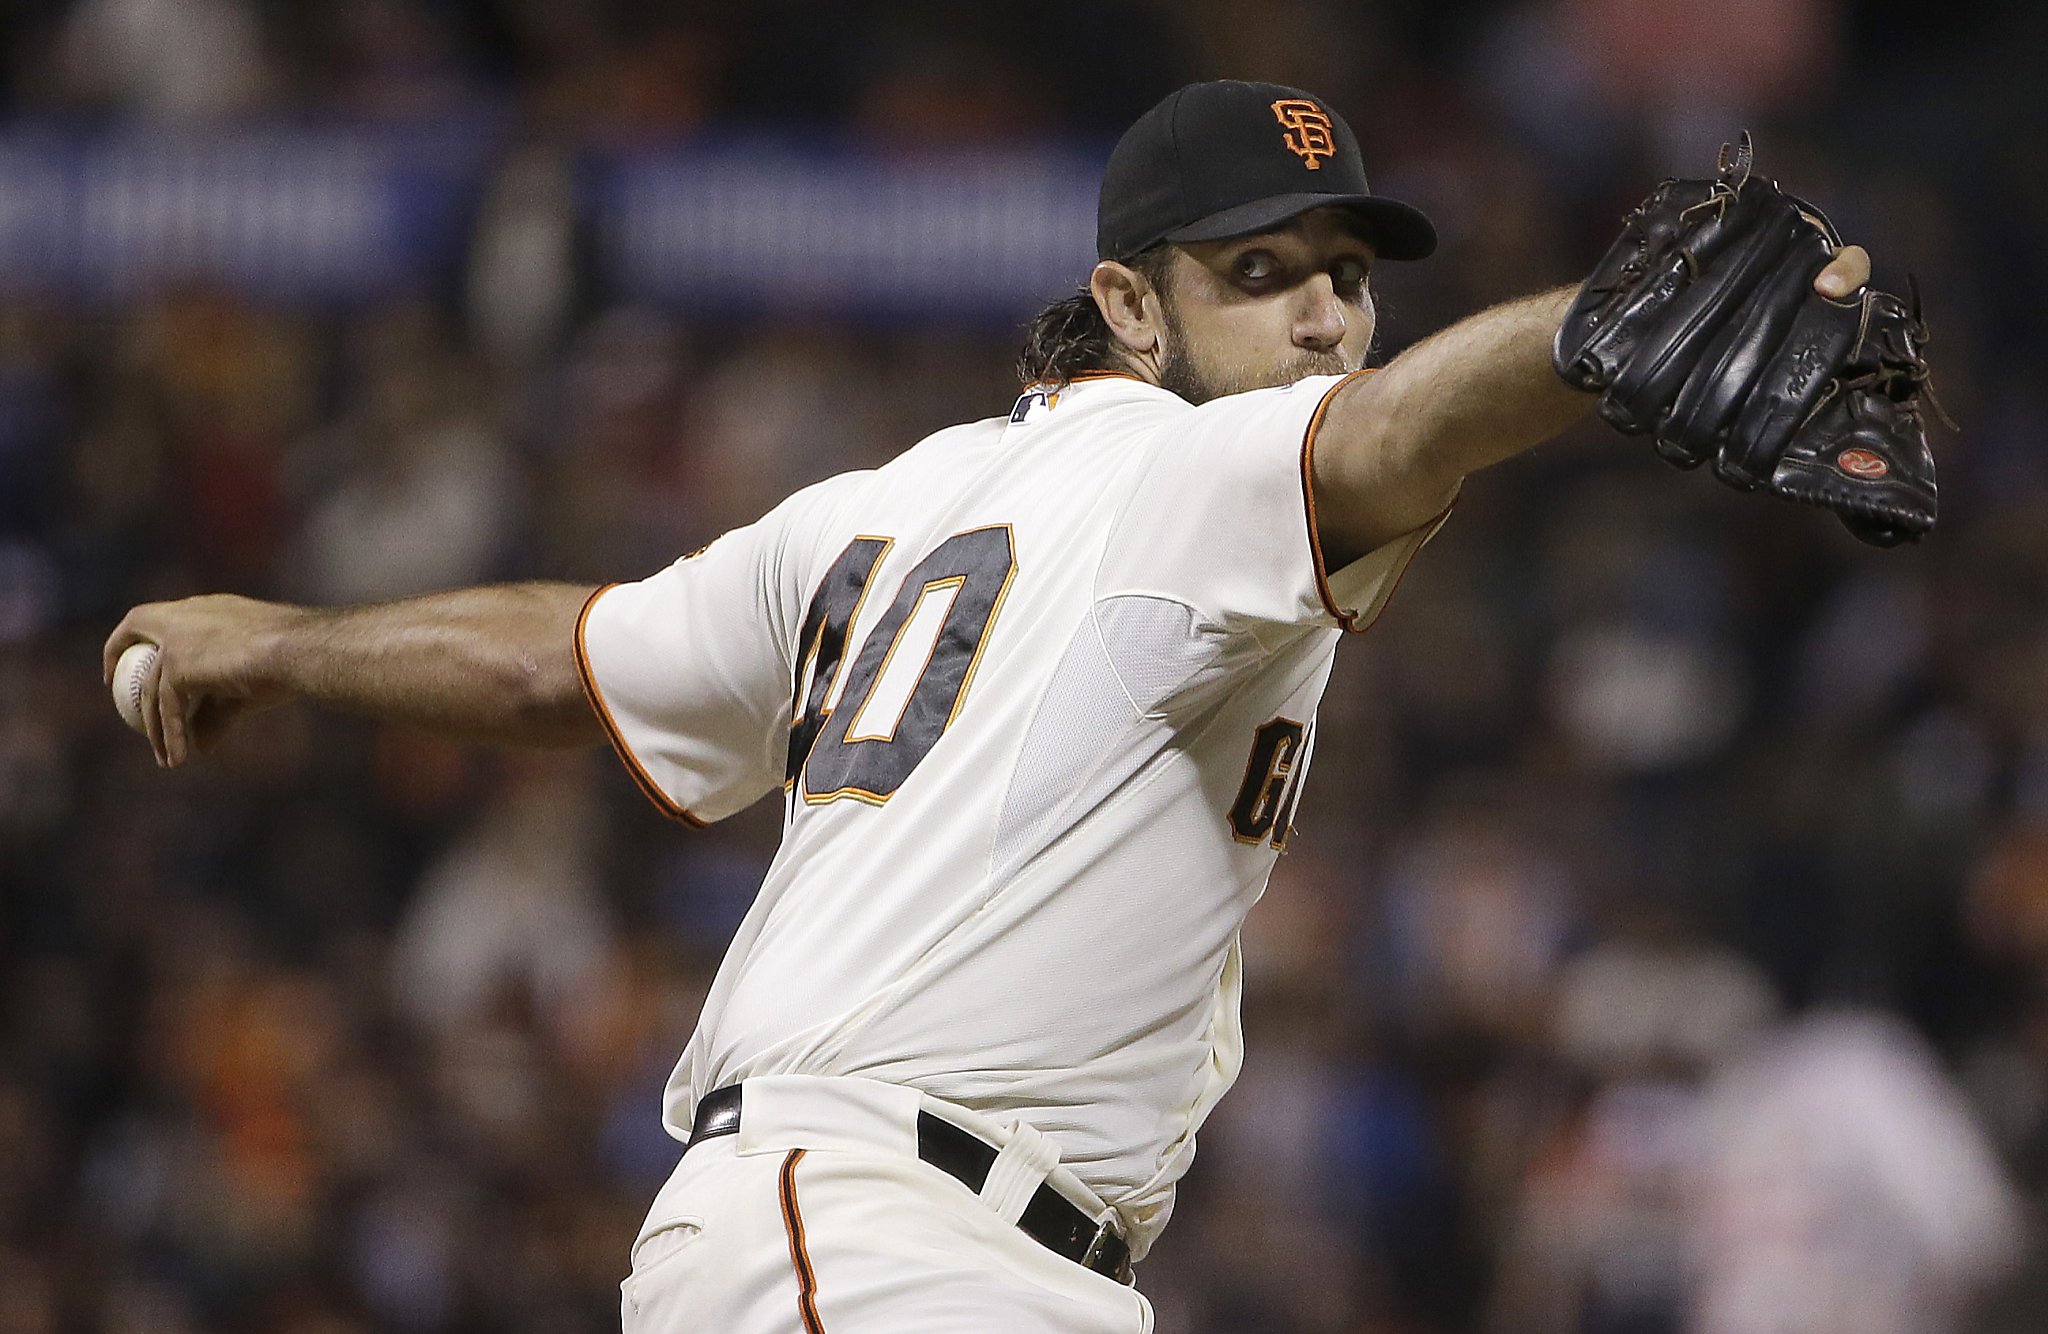 Giants have 3 of MLB's best-selling jerseys